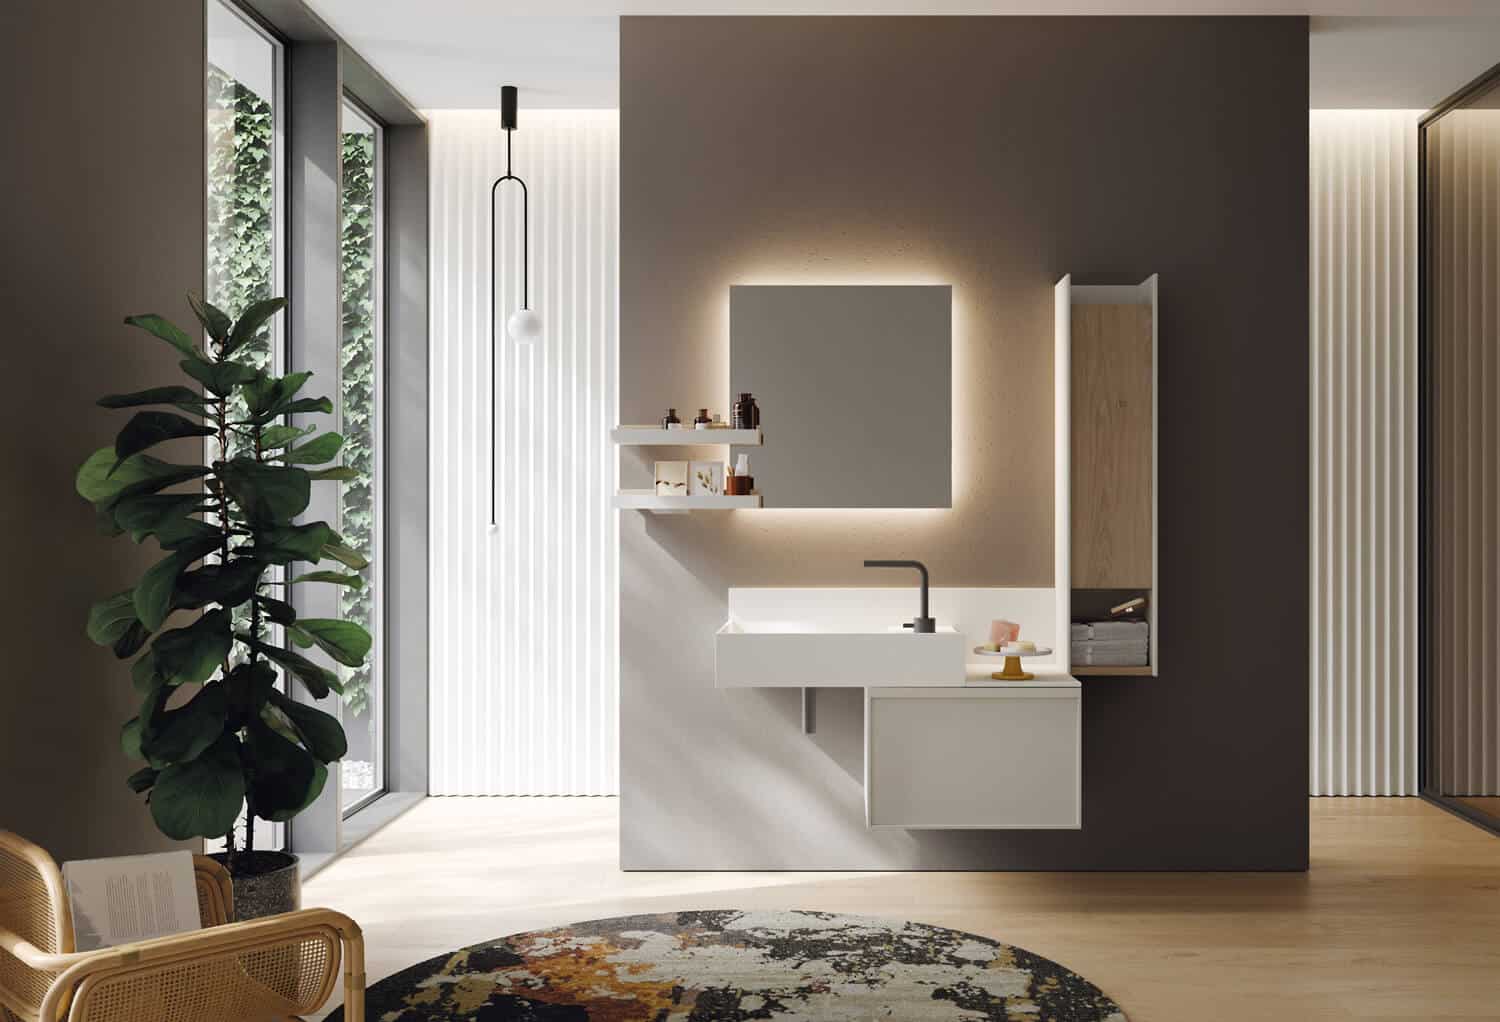 Cabinets in Cenere matte lacquer and Rovere Naturale. Square washbasin with back panel in White matte Teknorit. Premium mirror with perimeter LED lighting.